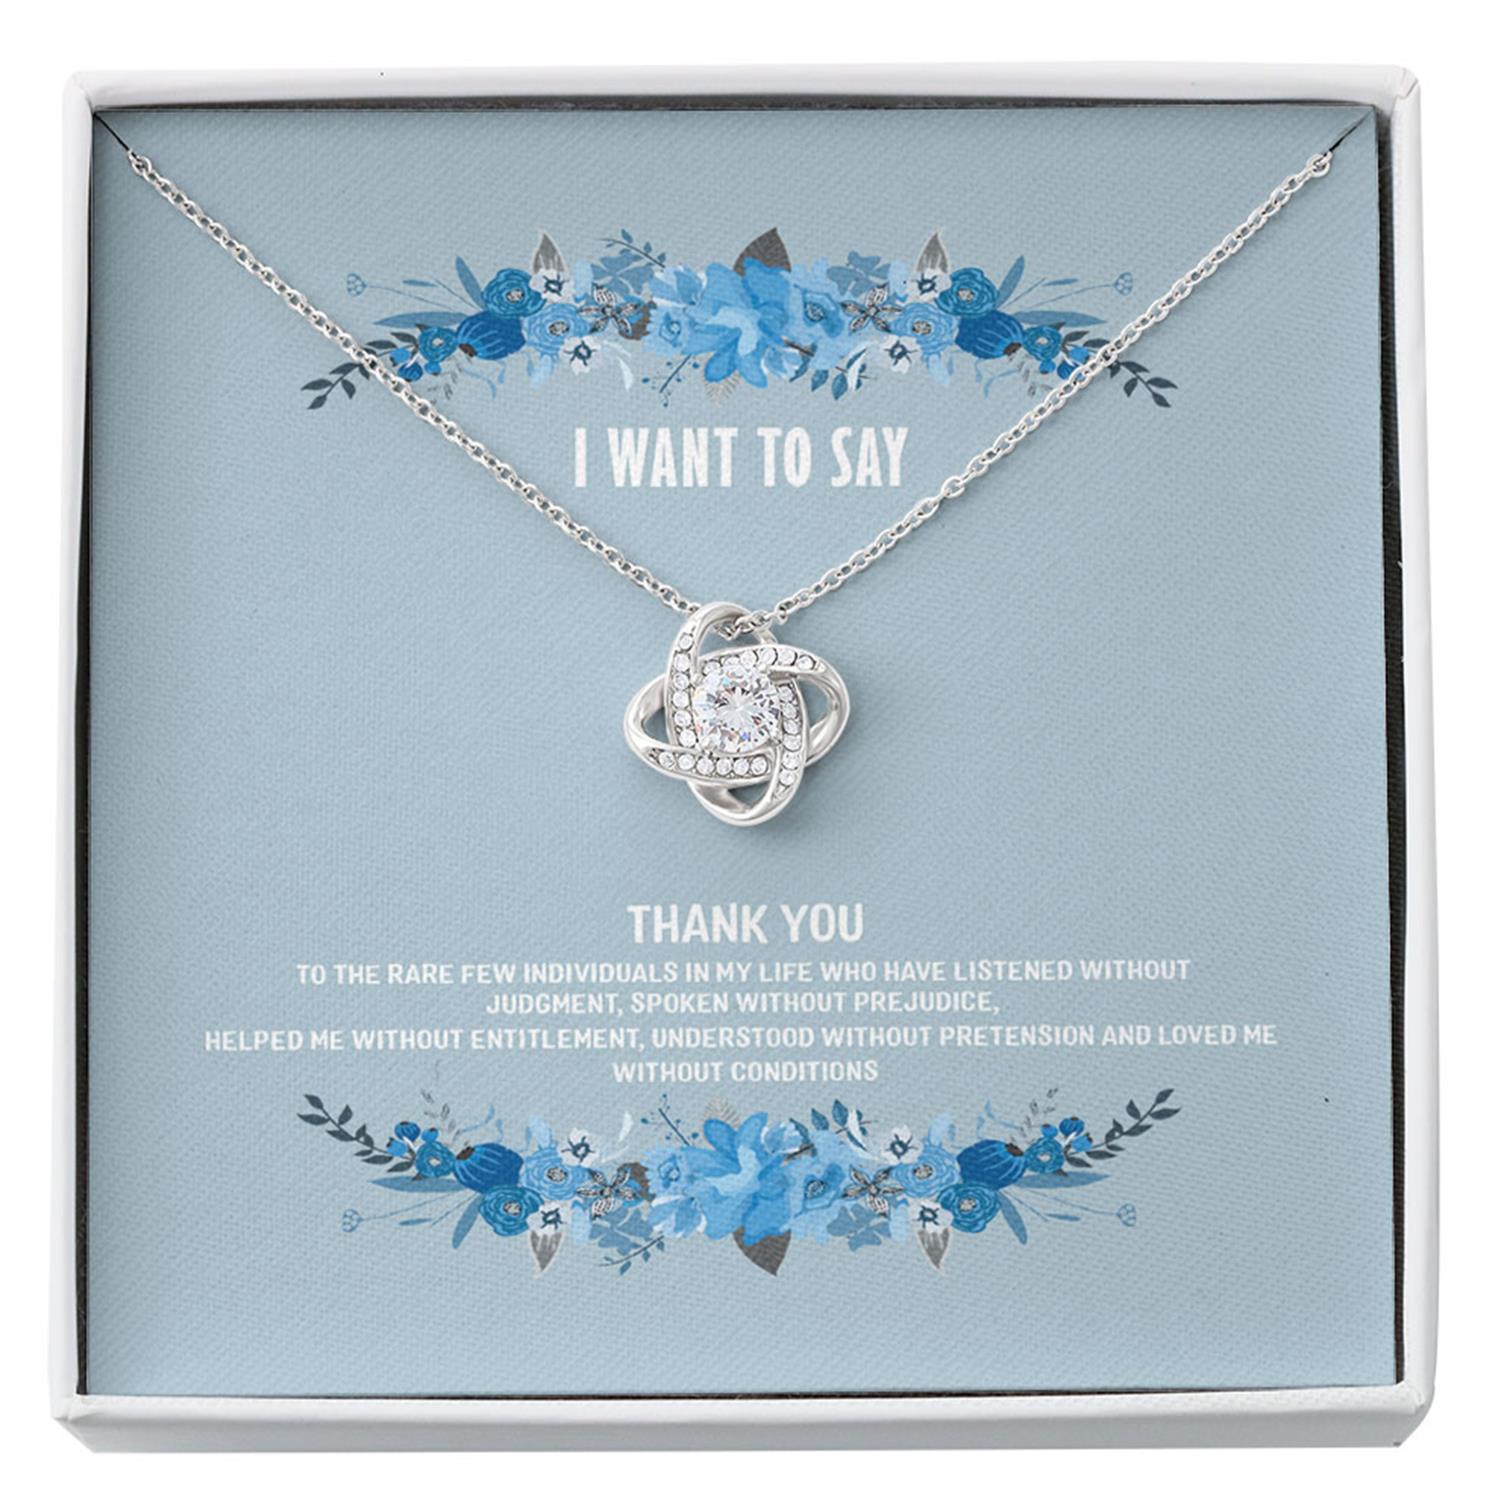 Friend Necklace, Grateful Necklace - Thank You Necklace - Necklace With Gift Box For Christmas Custom Necklace